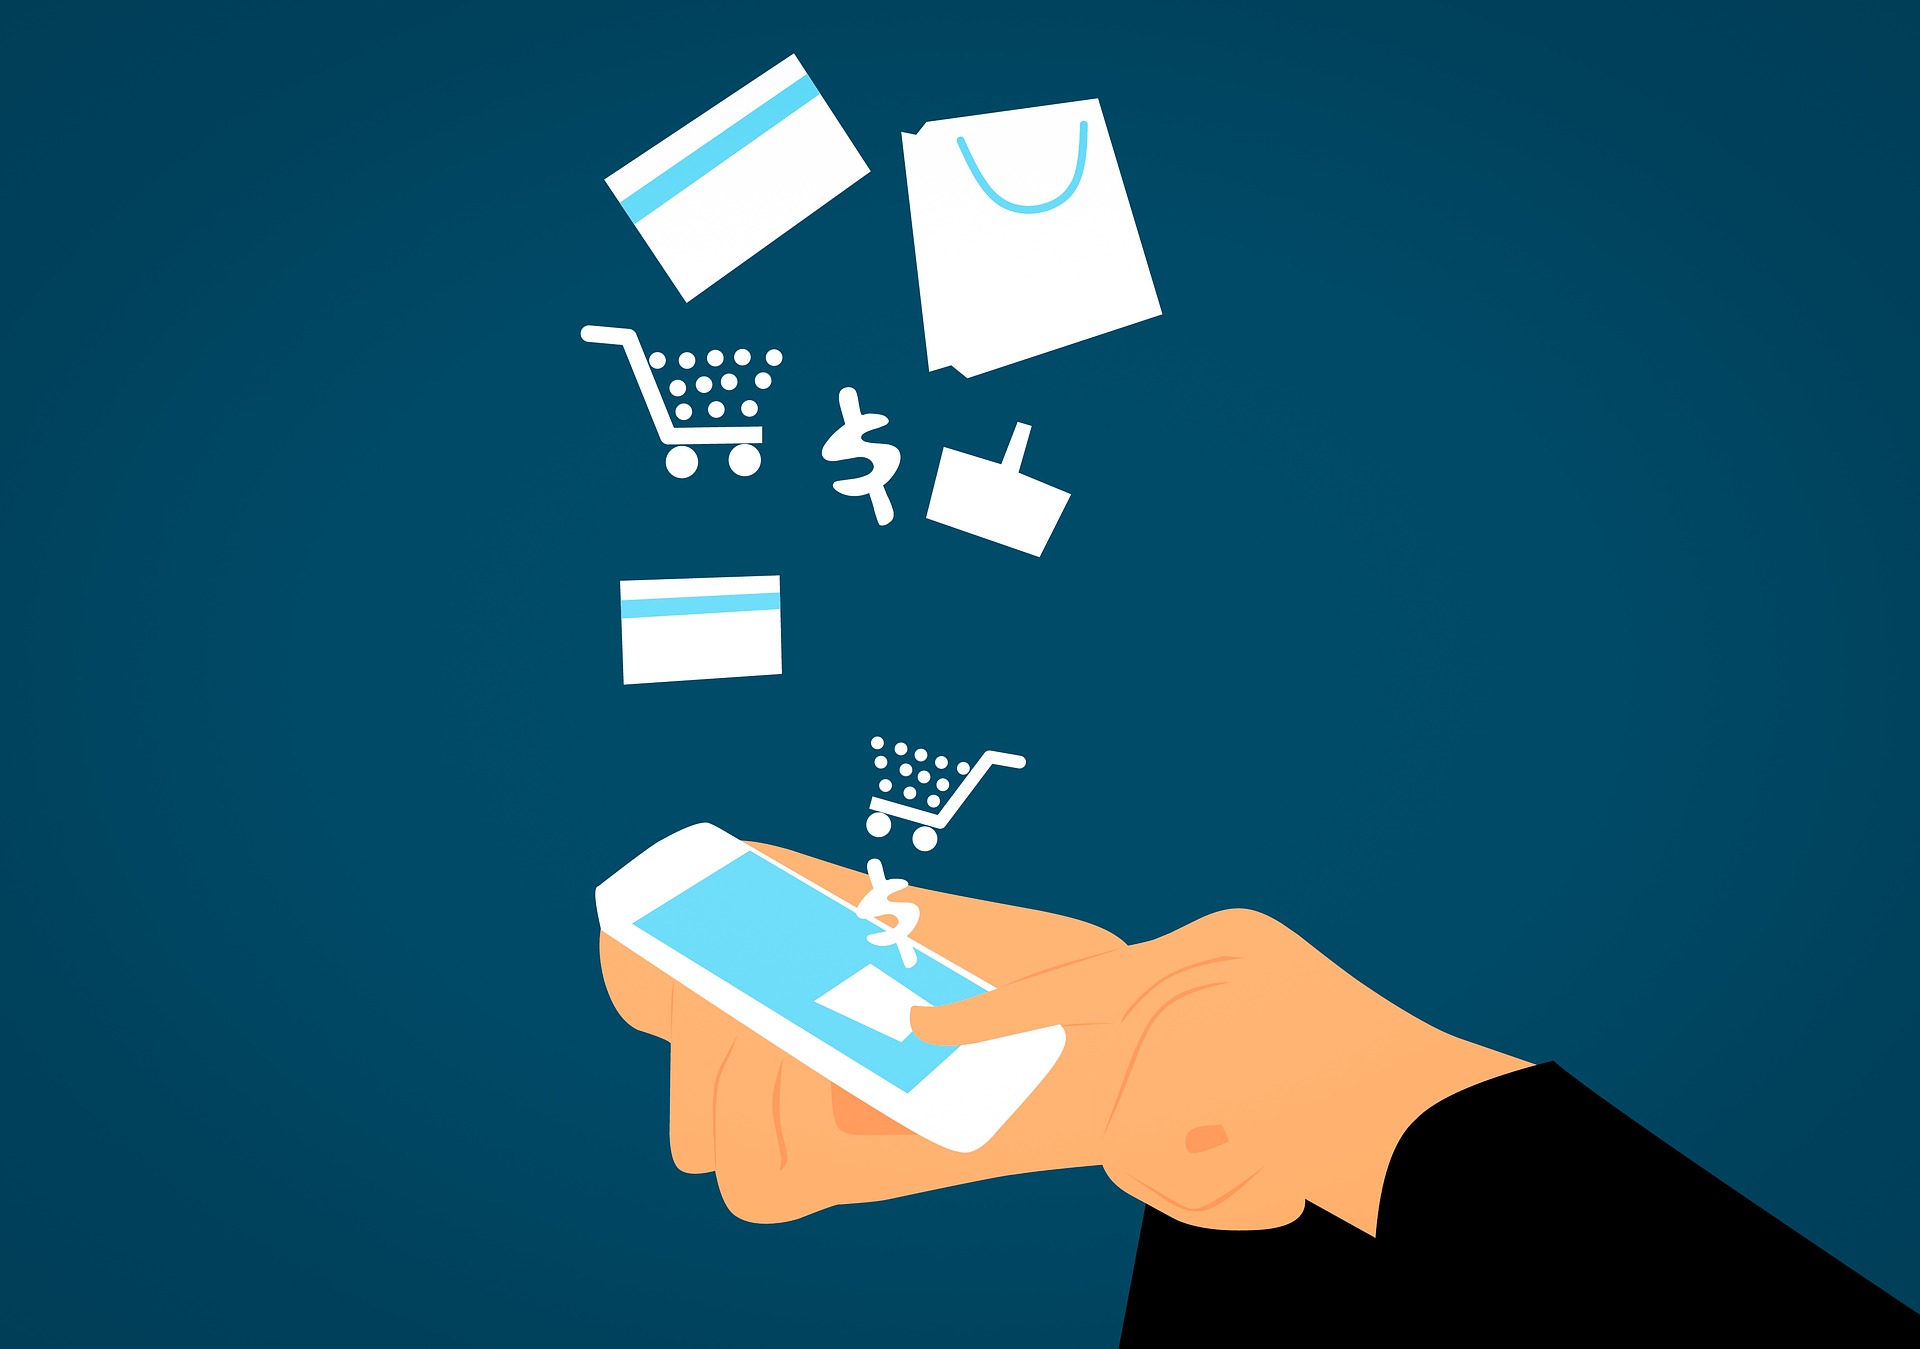 An illustration of a smartphone with shopping carts, credit cards and other items coming out of it, published to: "3 Tips for Running Small Business Email Marketing Campaigns"